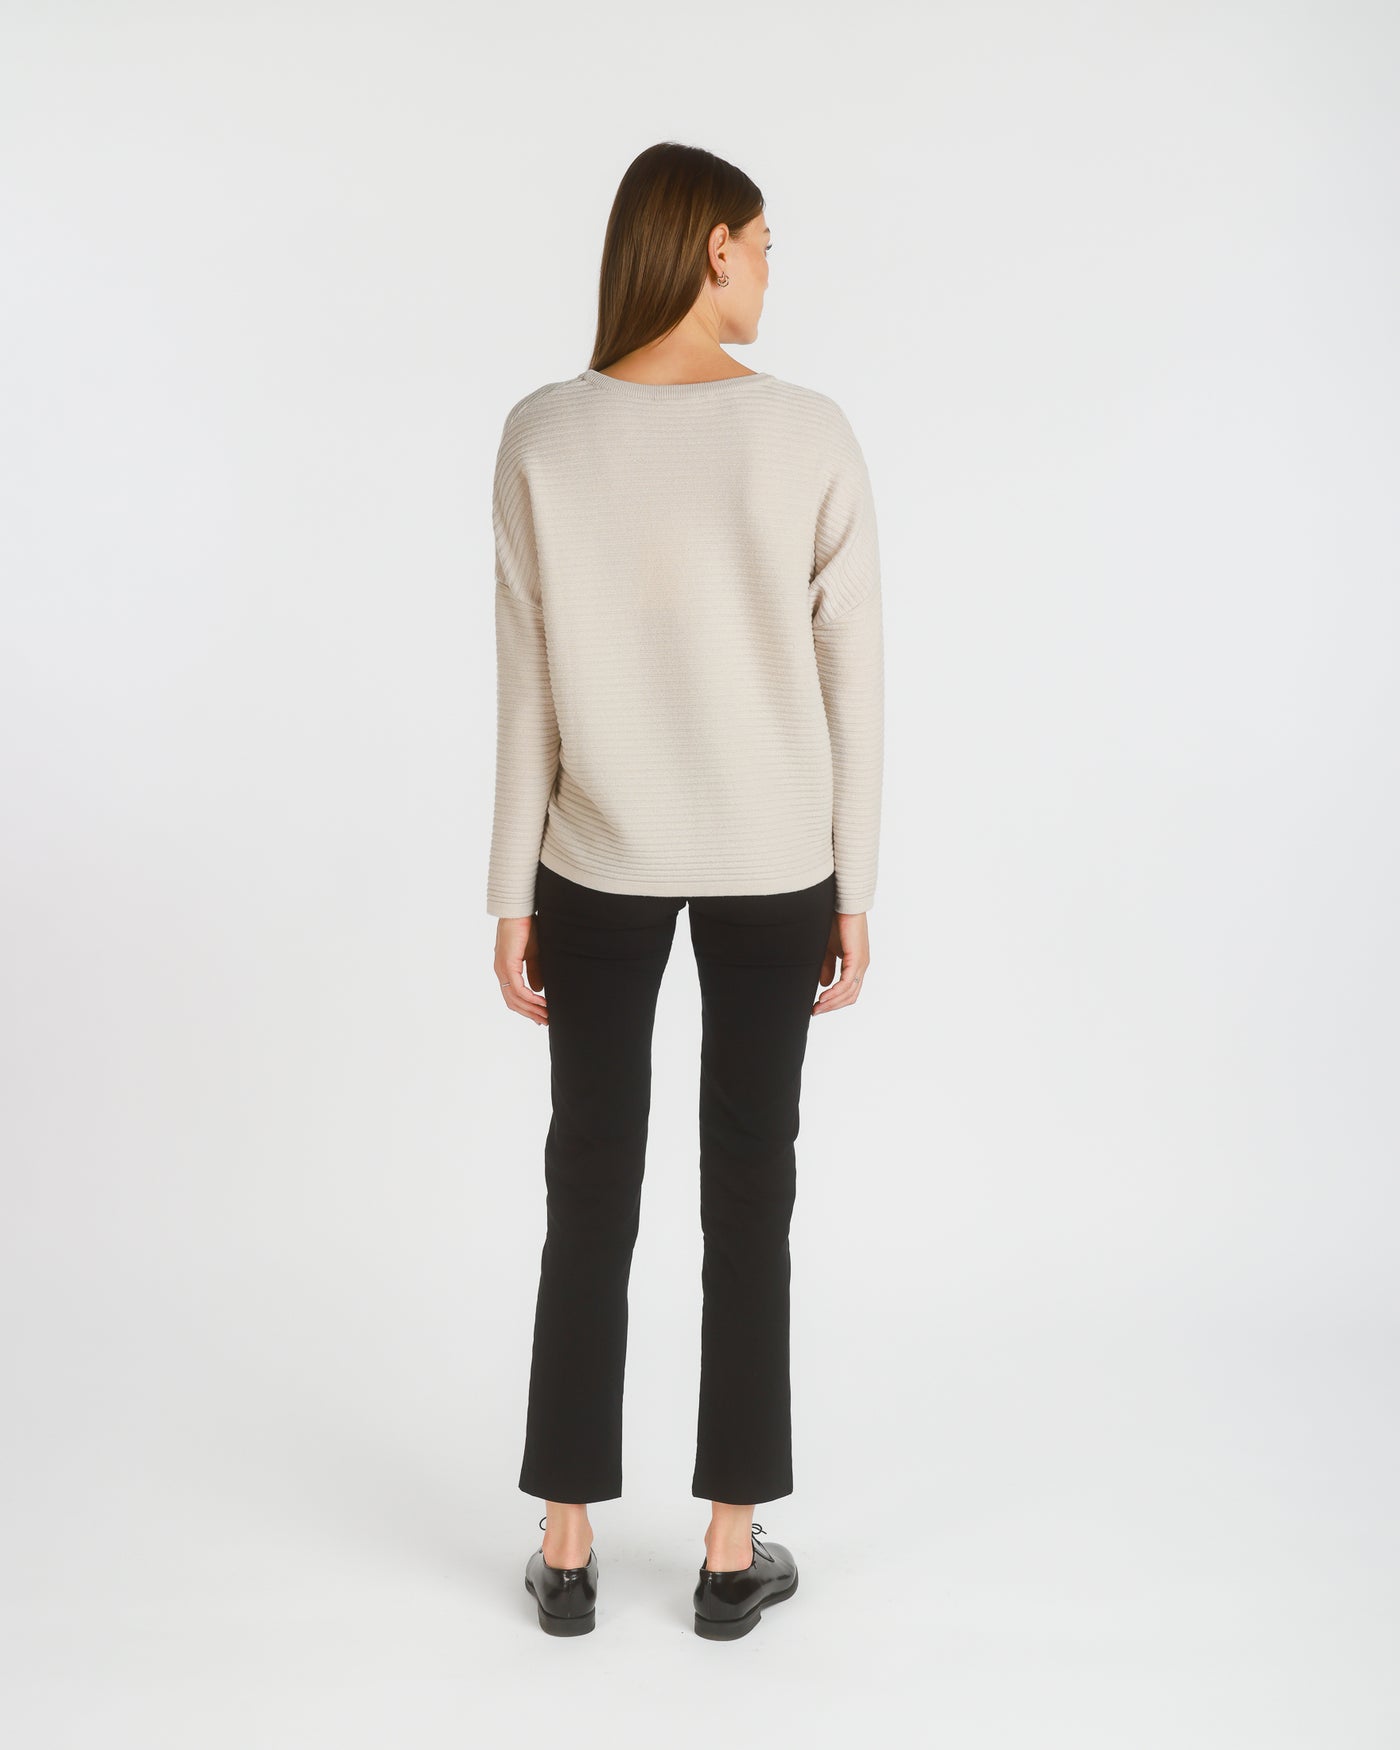 Muse Merino Ribbed Sweater. Light Beige. One Size